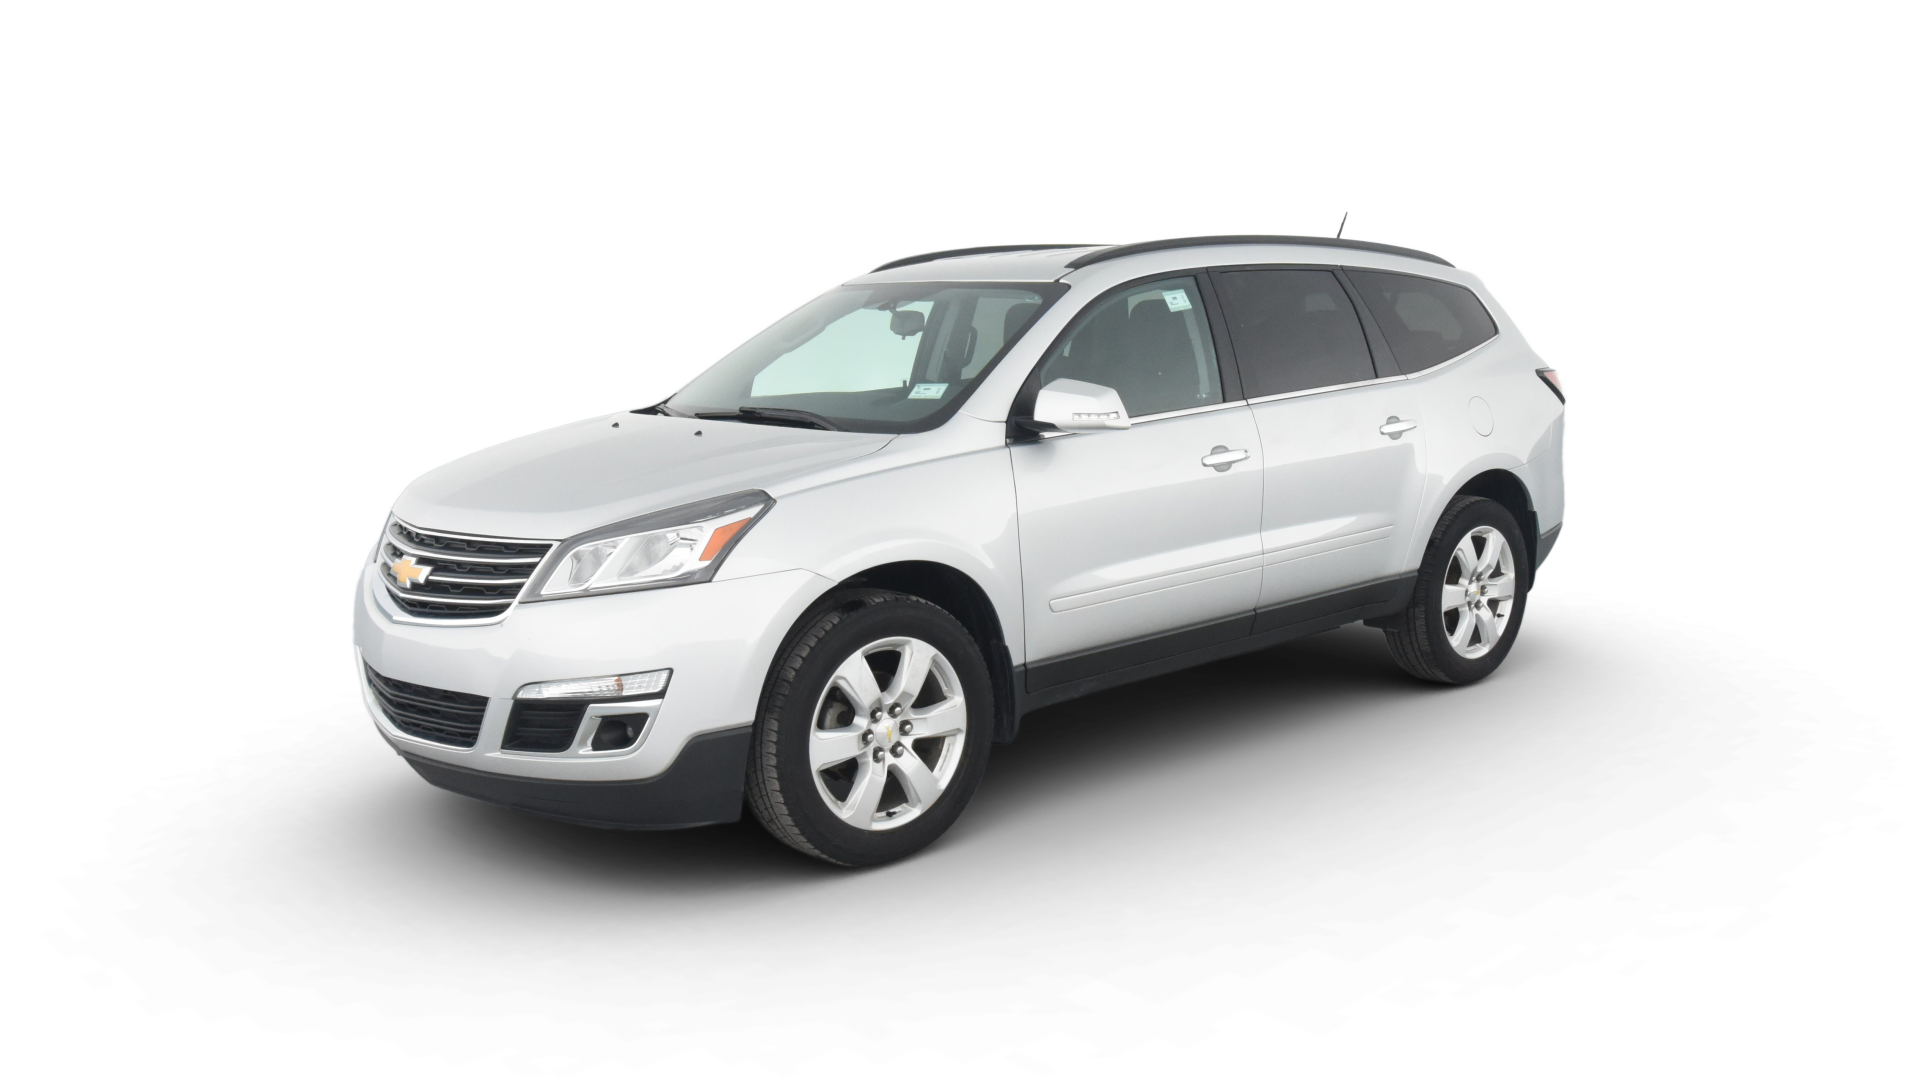 Used 2017 Chevrolet Traverse For Sale Online | Carvana